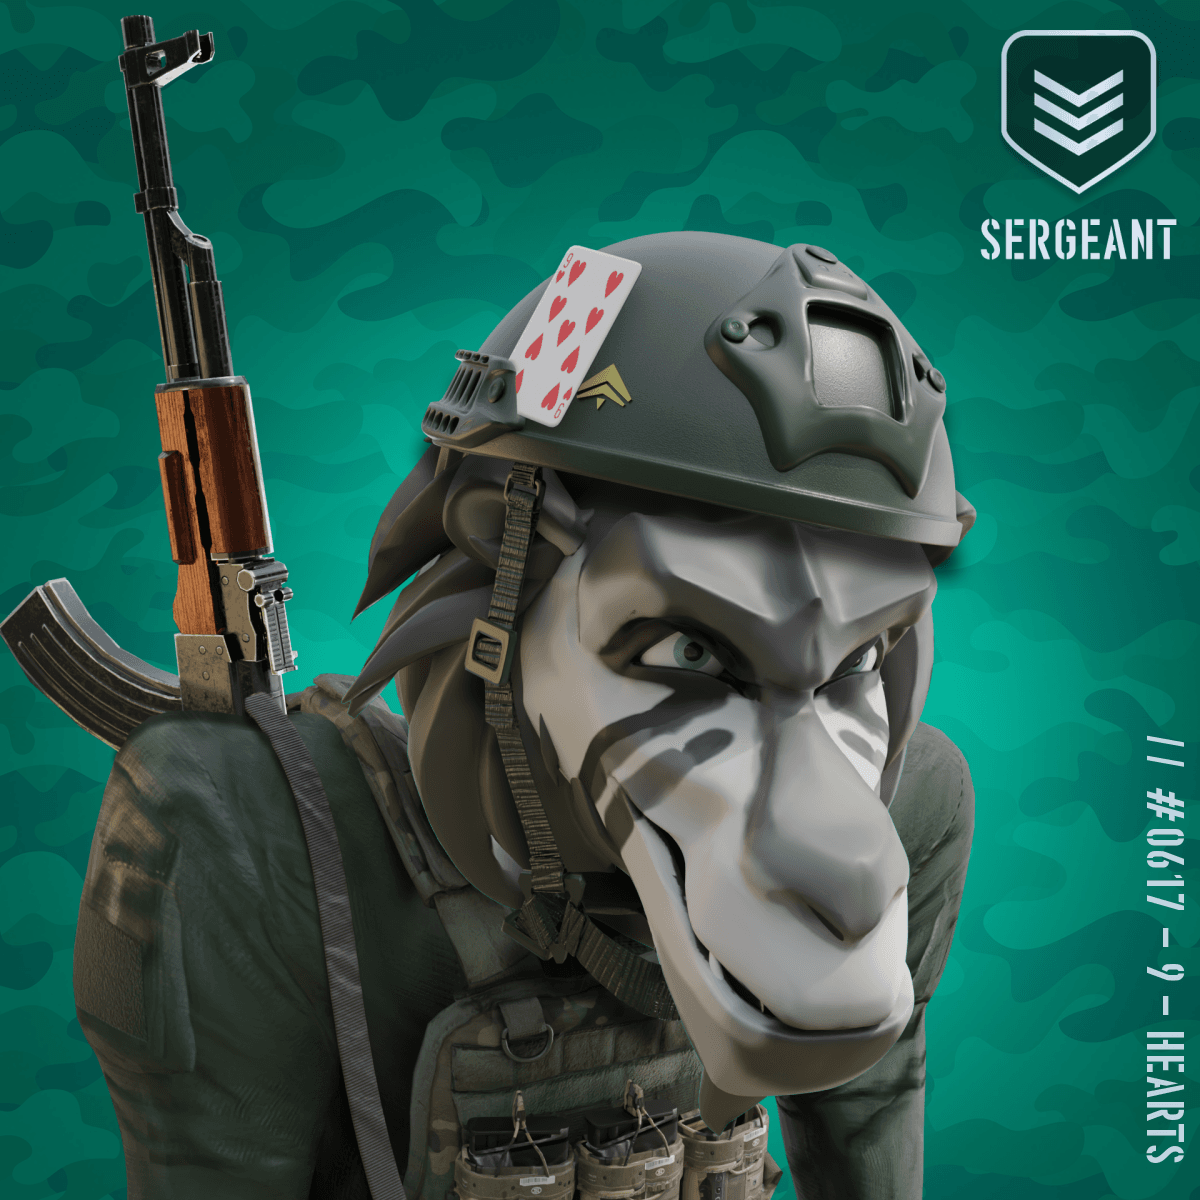 Angry Black Sergeant Baboon #617